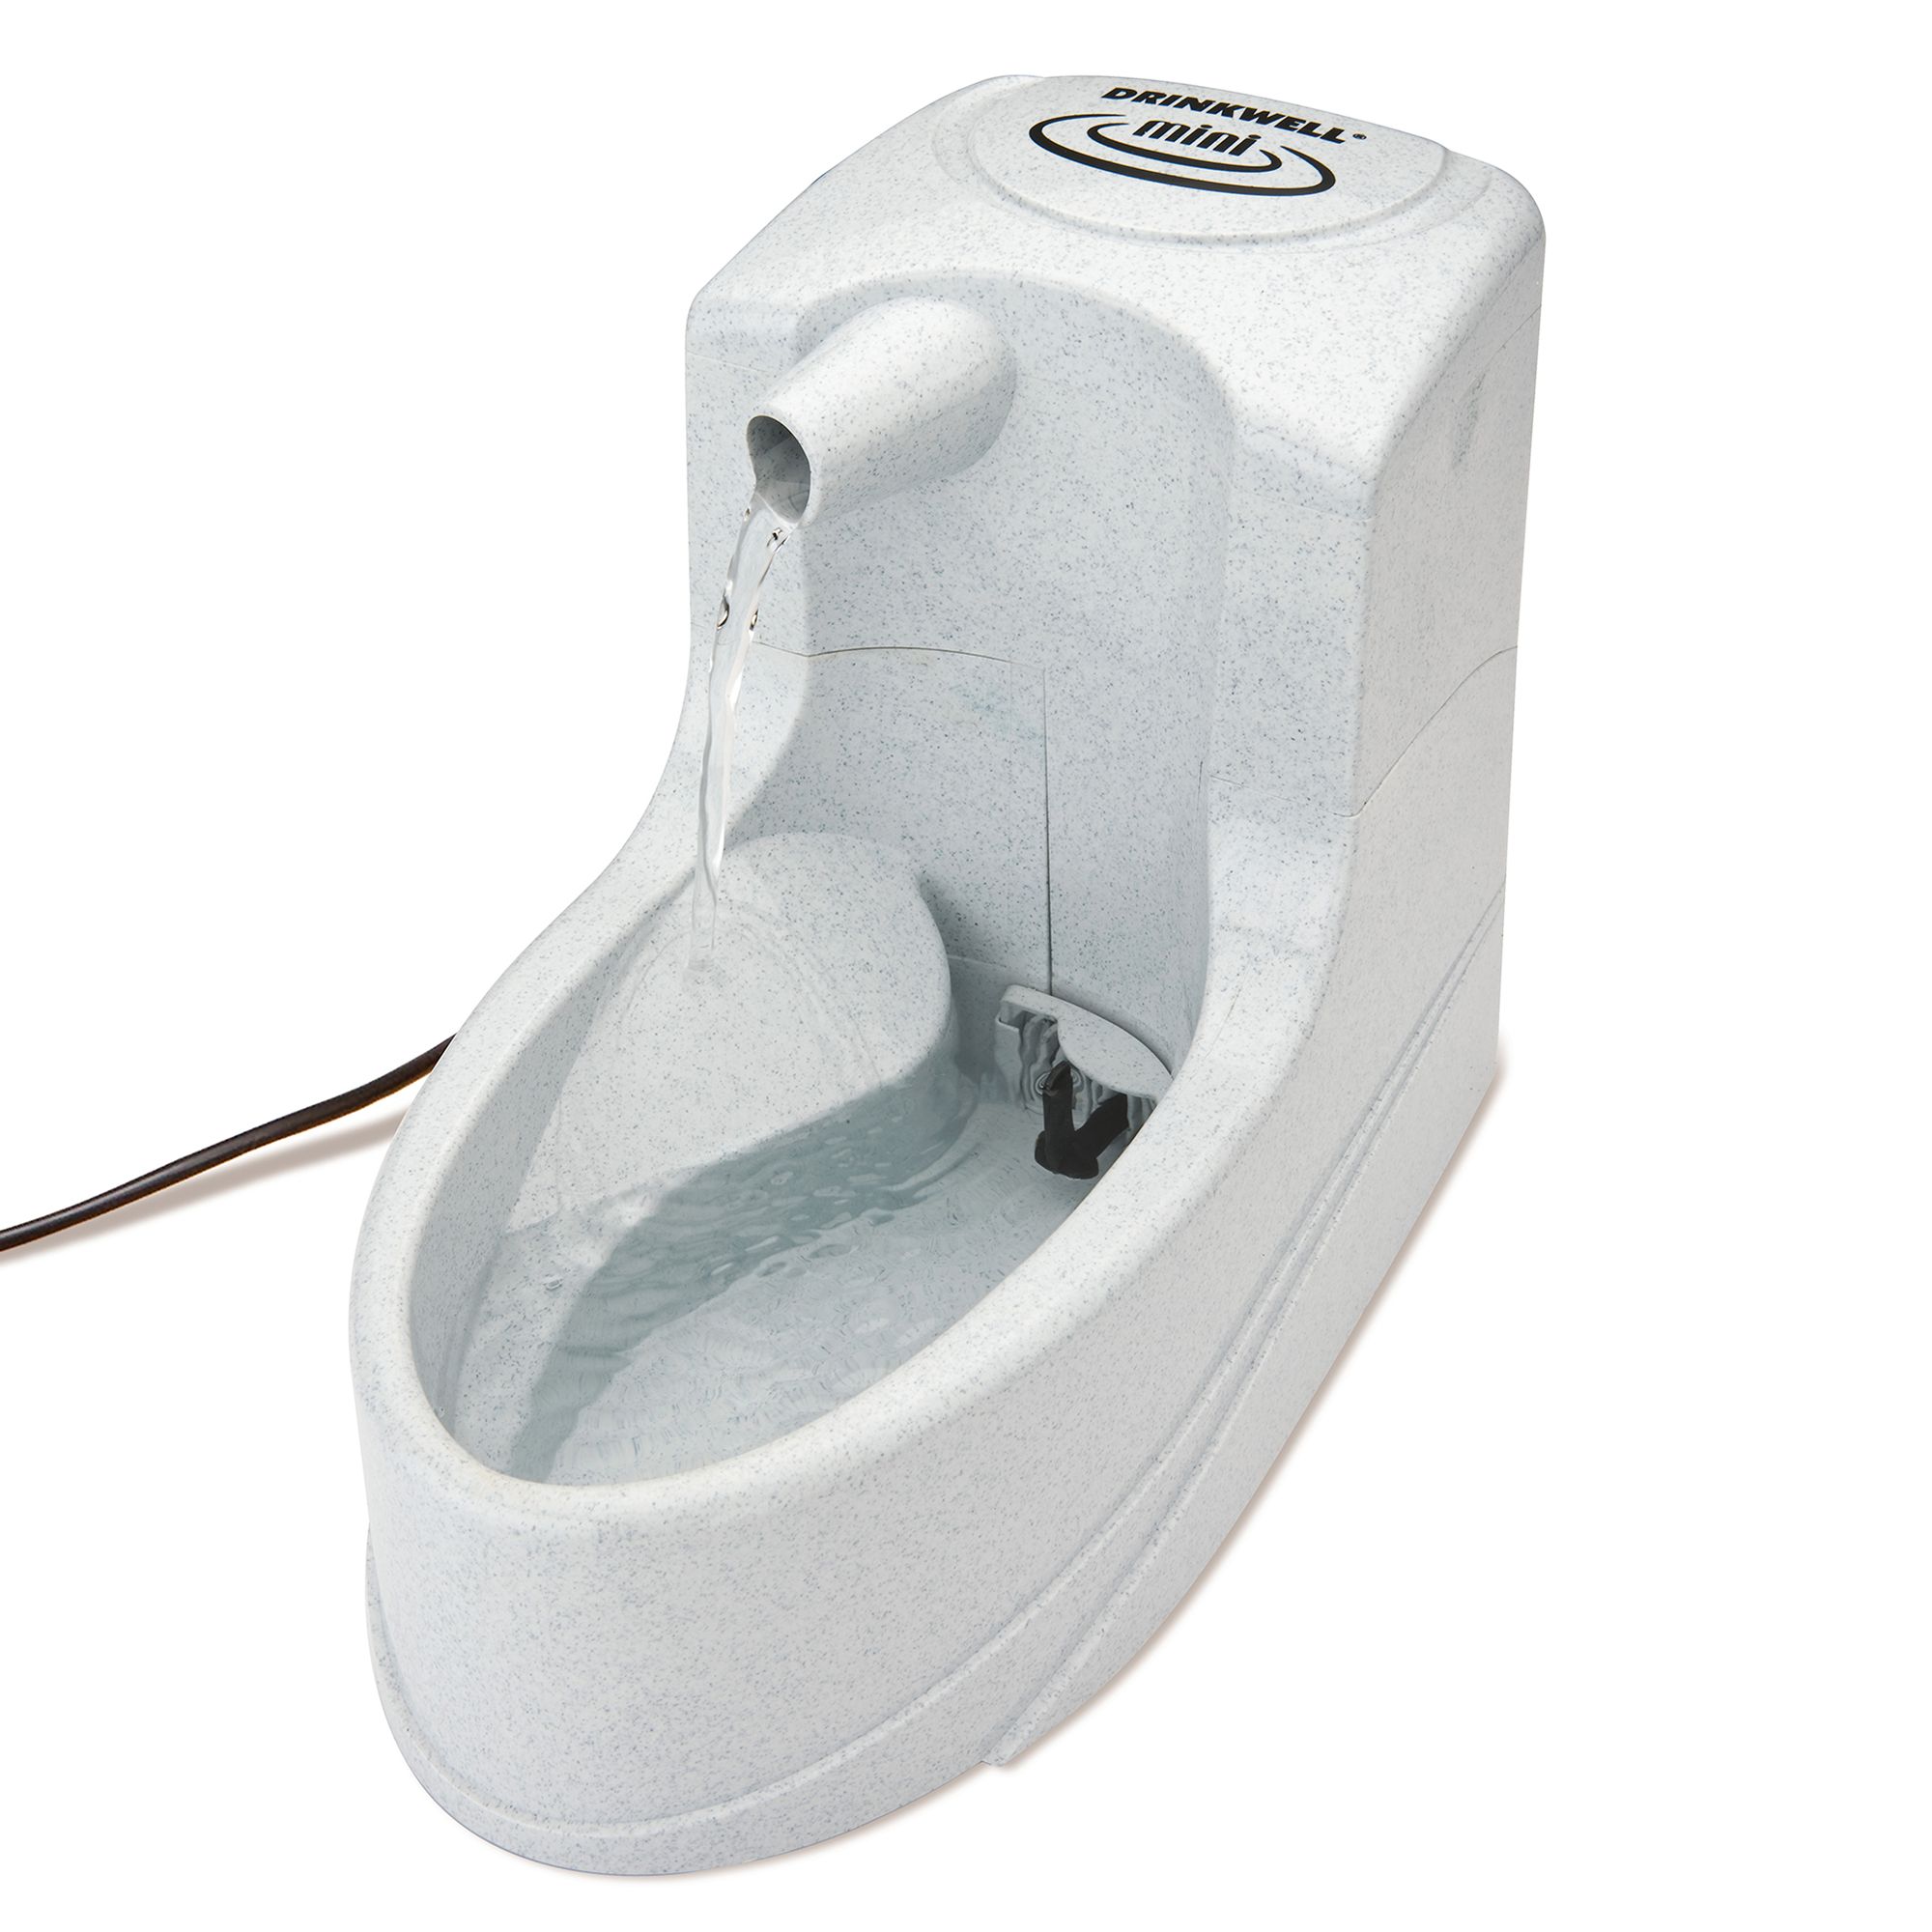 drinkwell pet fountain